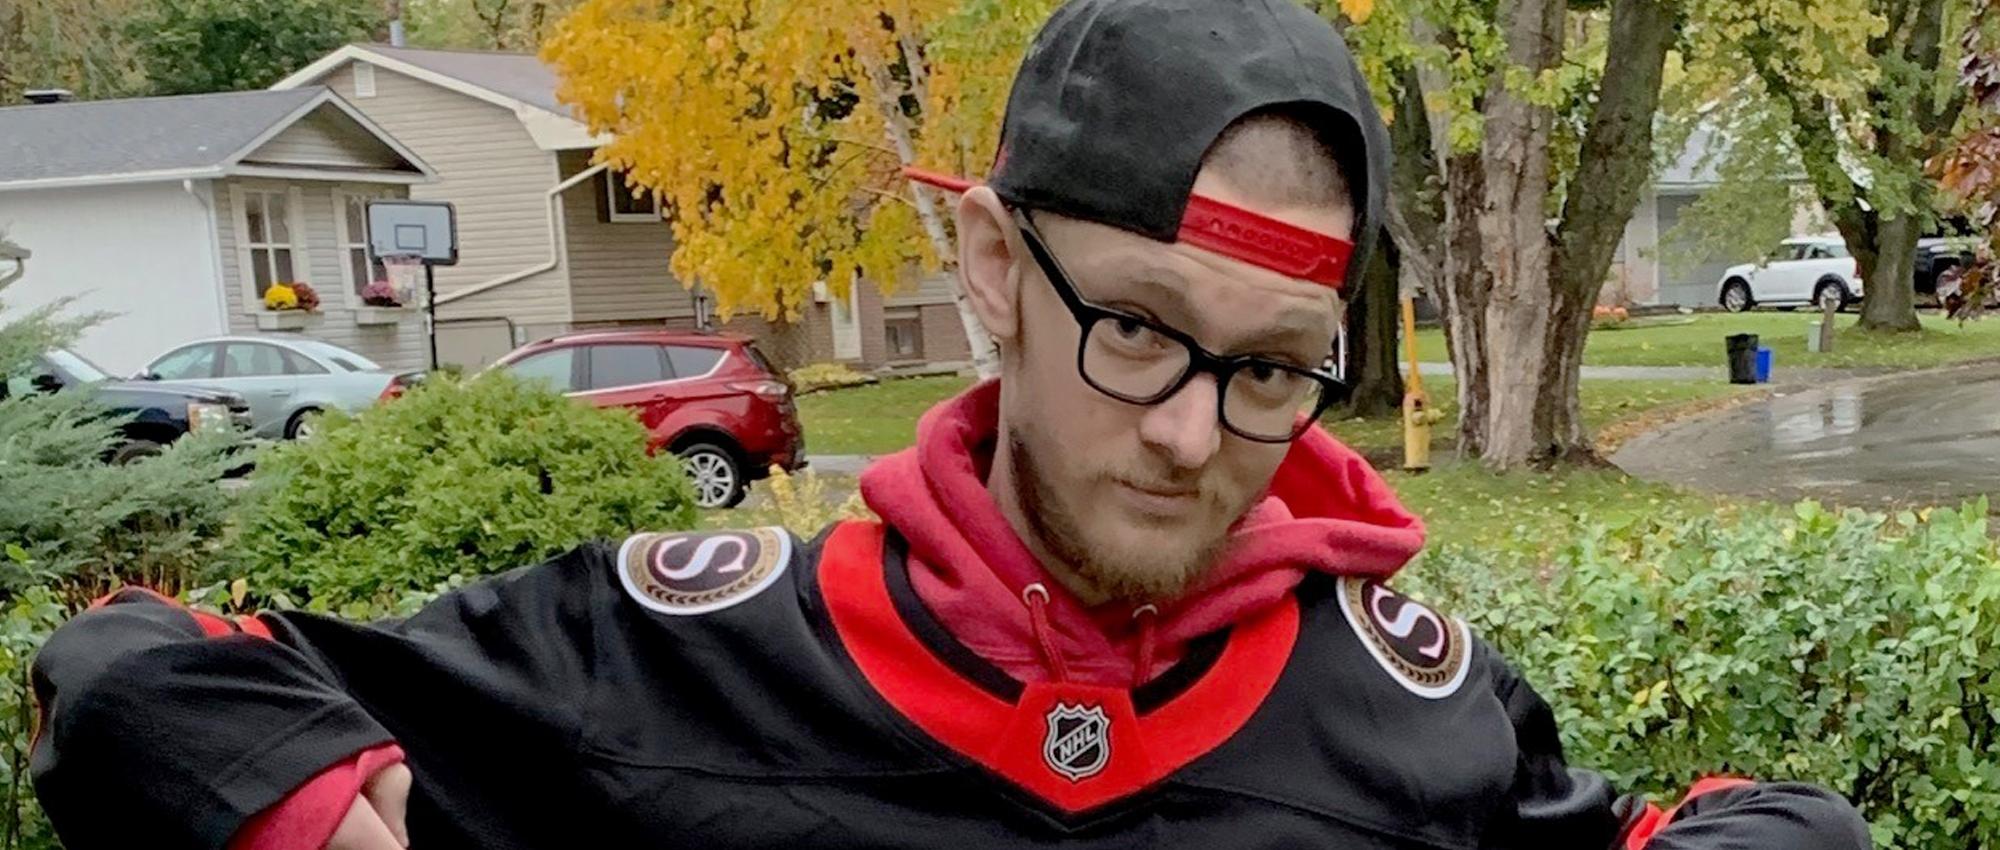 Image of Brian Fraser with black glasses wearing an Ottawa Senators jersey and a backwards cap.